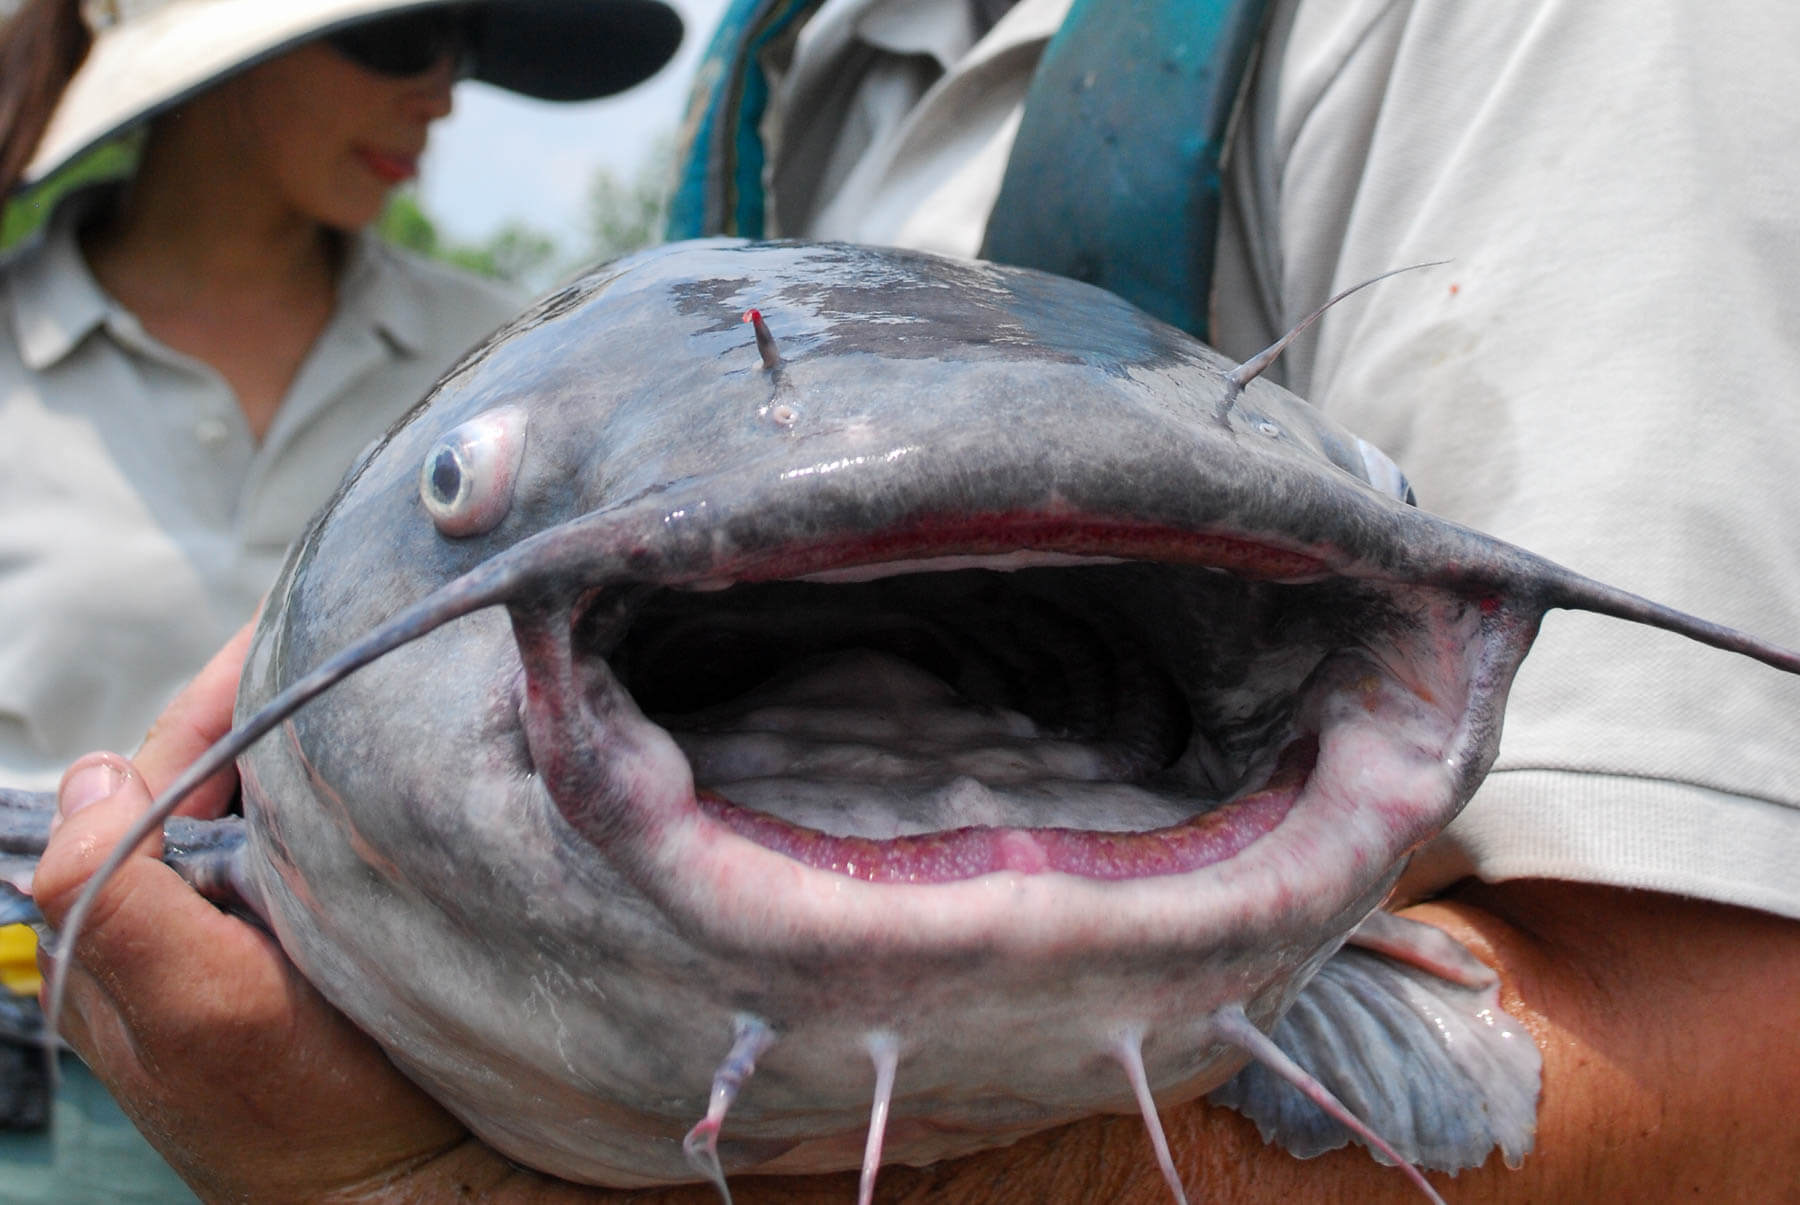 Outdoors: The good kind of catfishing